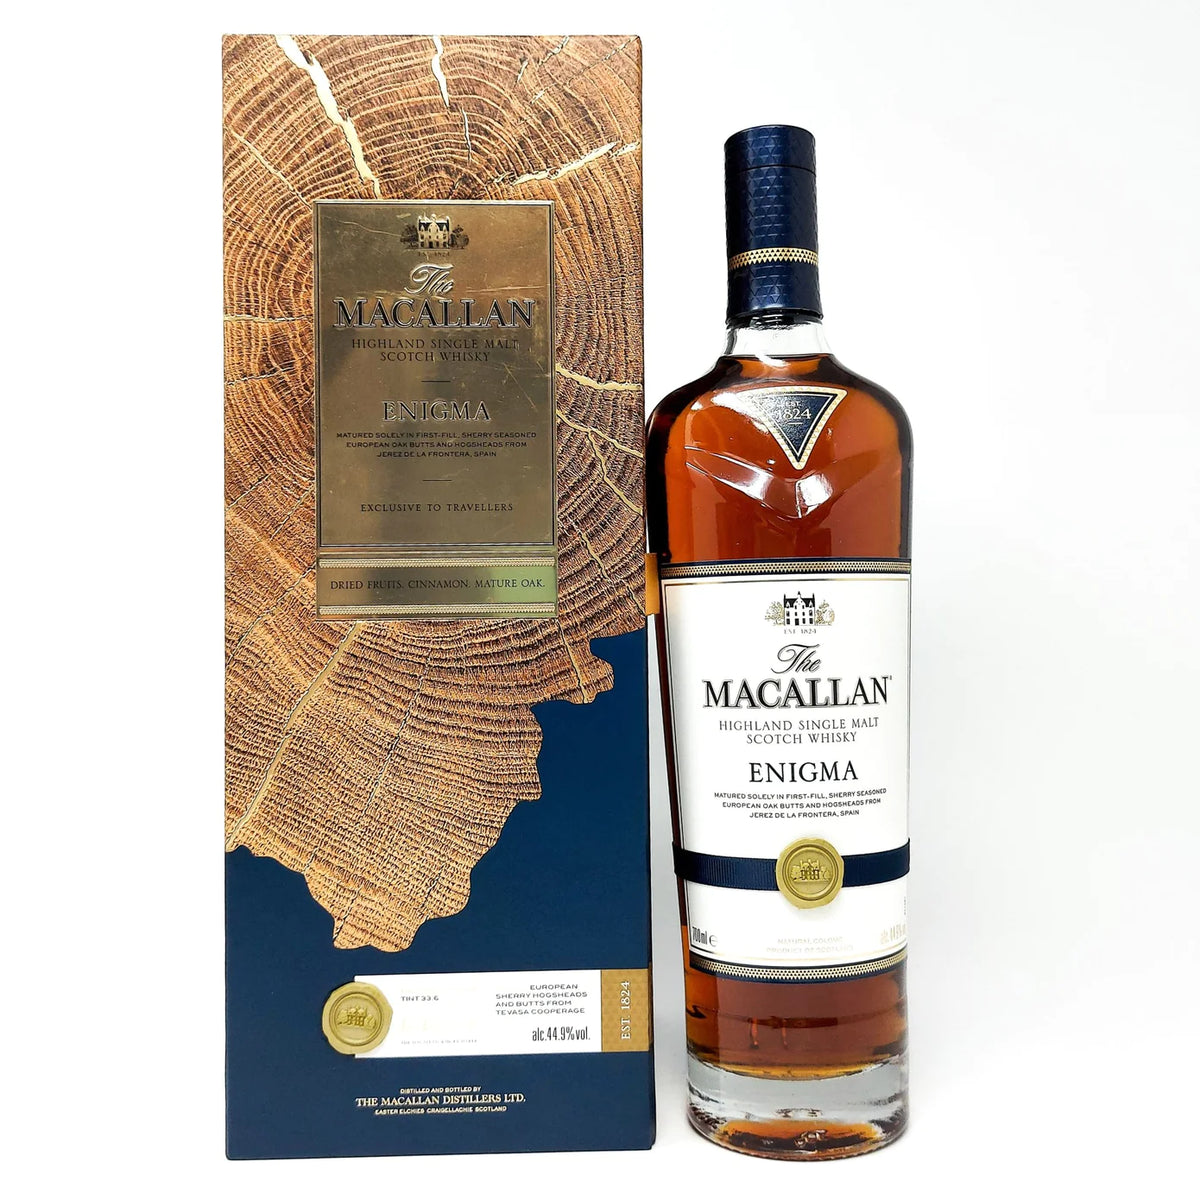 Macallan Enigma whisky